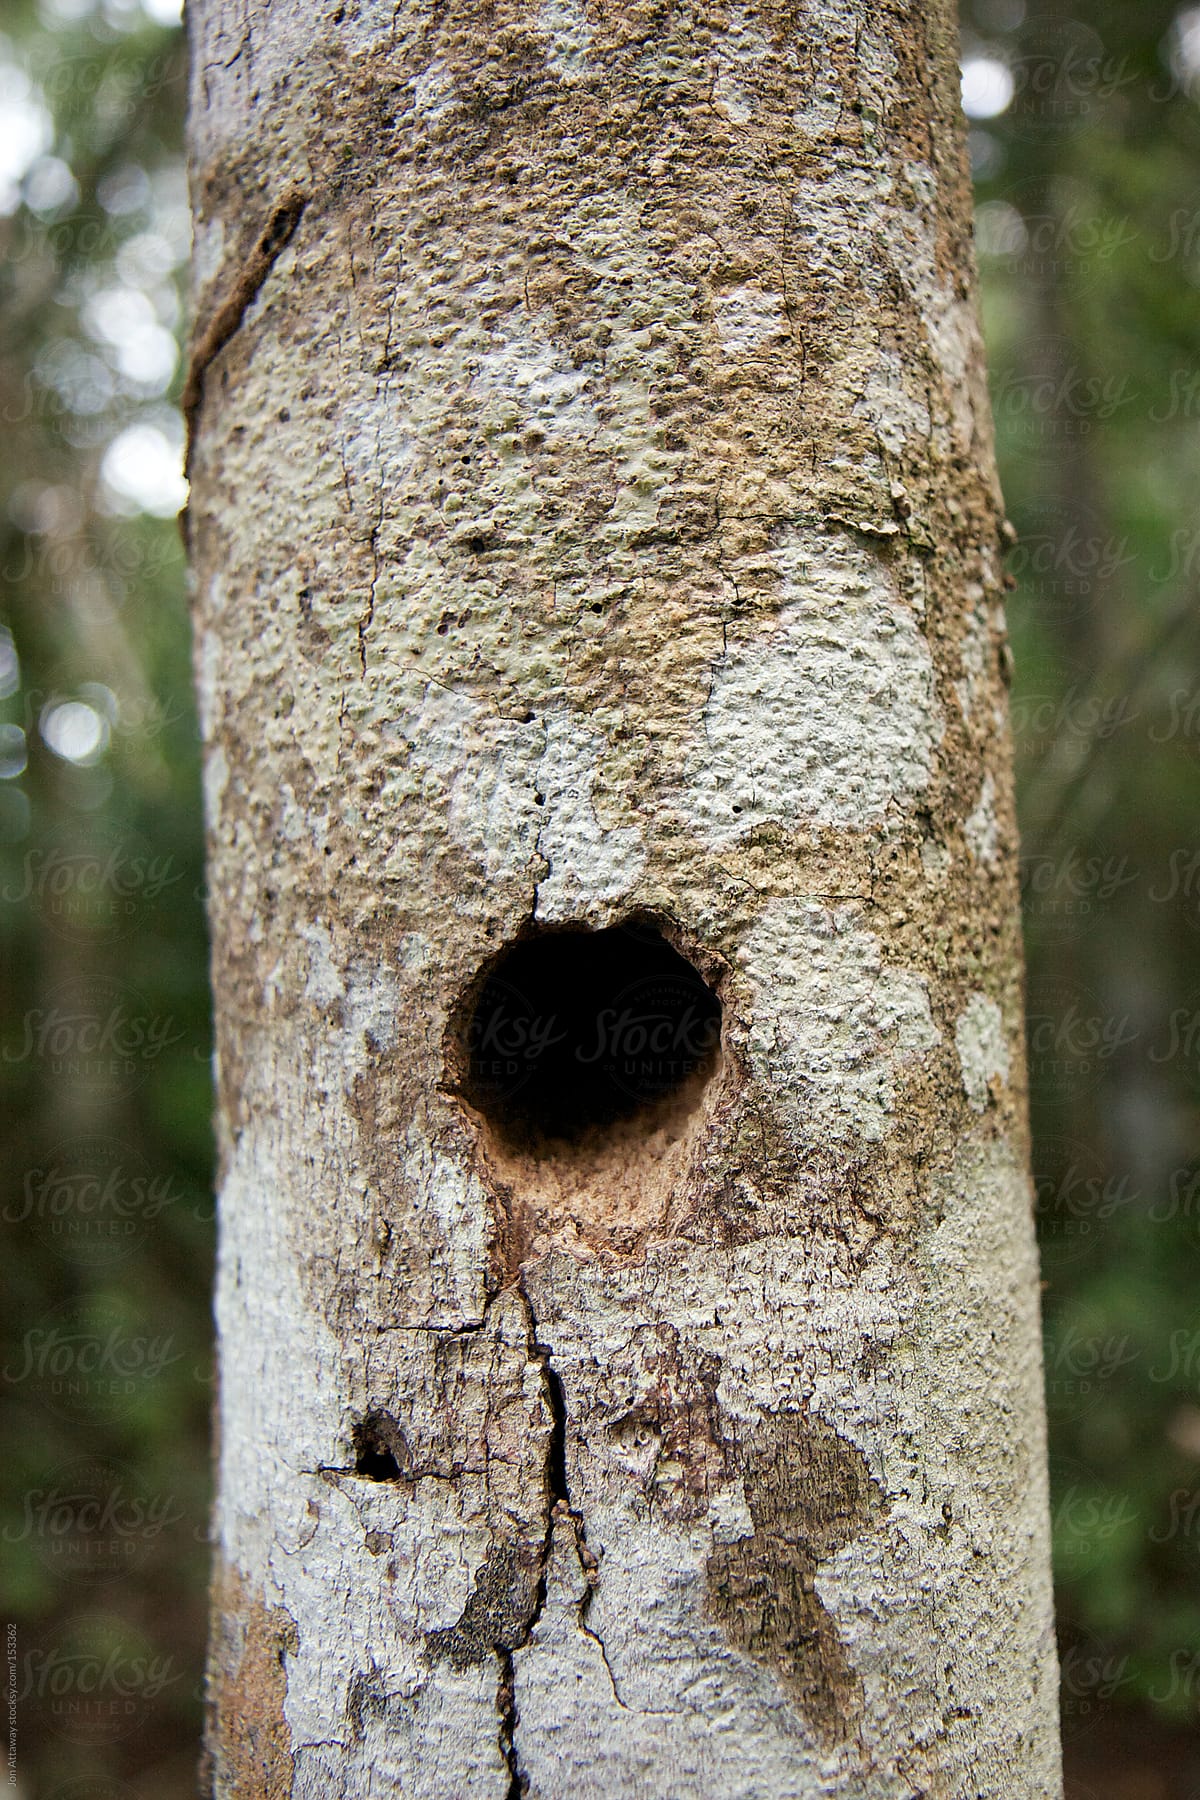 A mysterious hole in a tree trunk